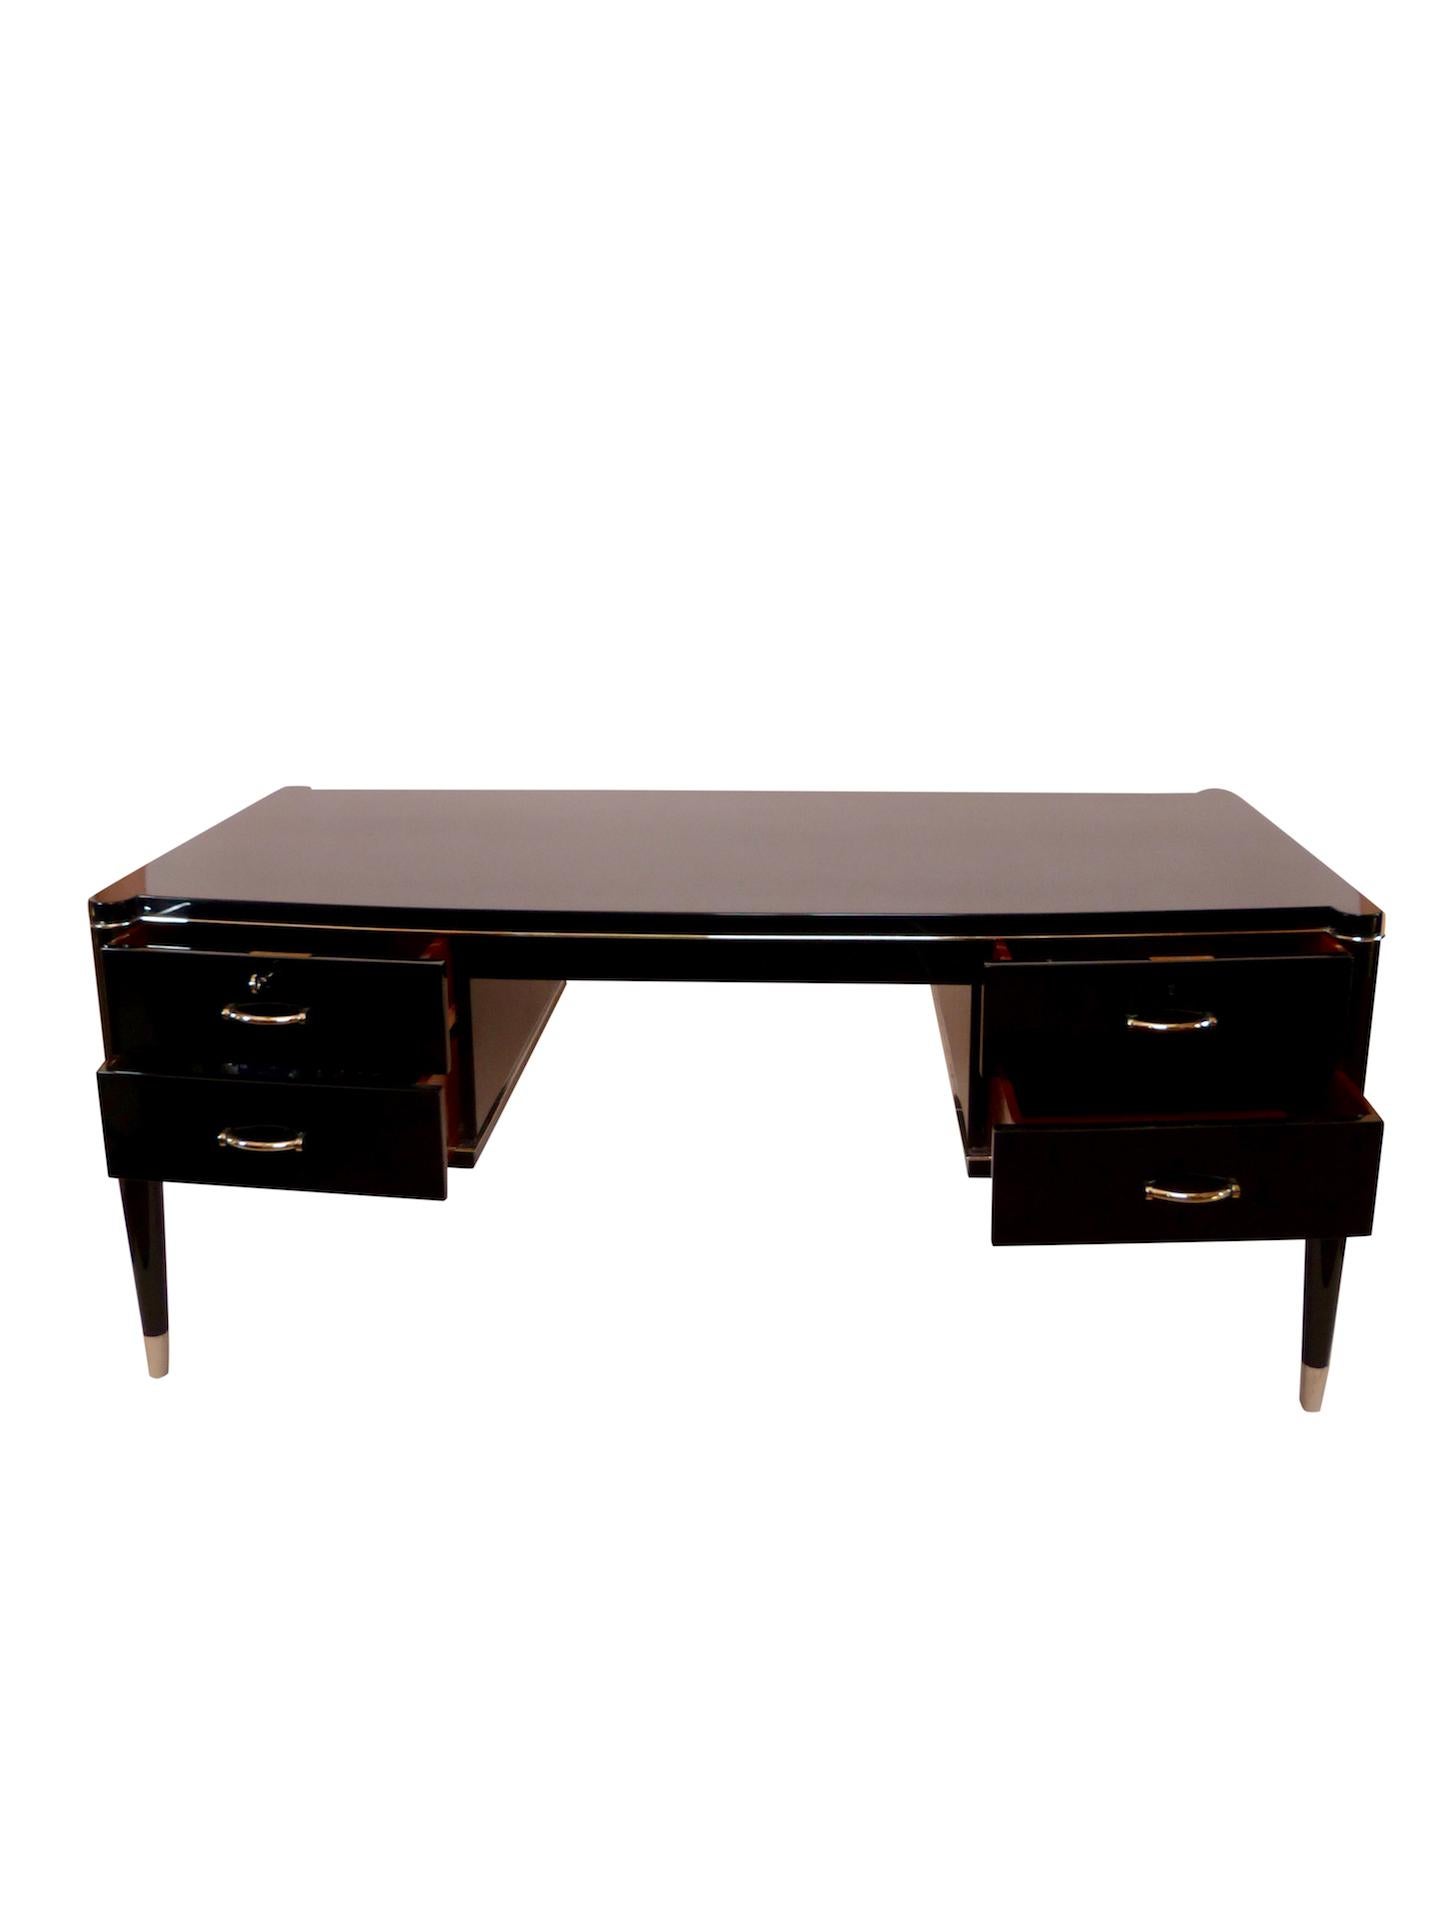 Representative desk for the Bosses in the executive suite 
Two doors on the backside for the secretary 
High gloss black piano lacquer
Nickeled metal fittings and sabots
All metals original
Four drawers, two with key lock 
Original Belgian Art